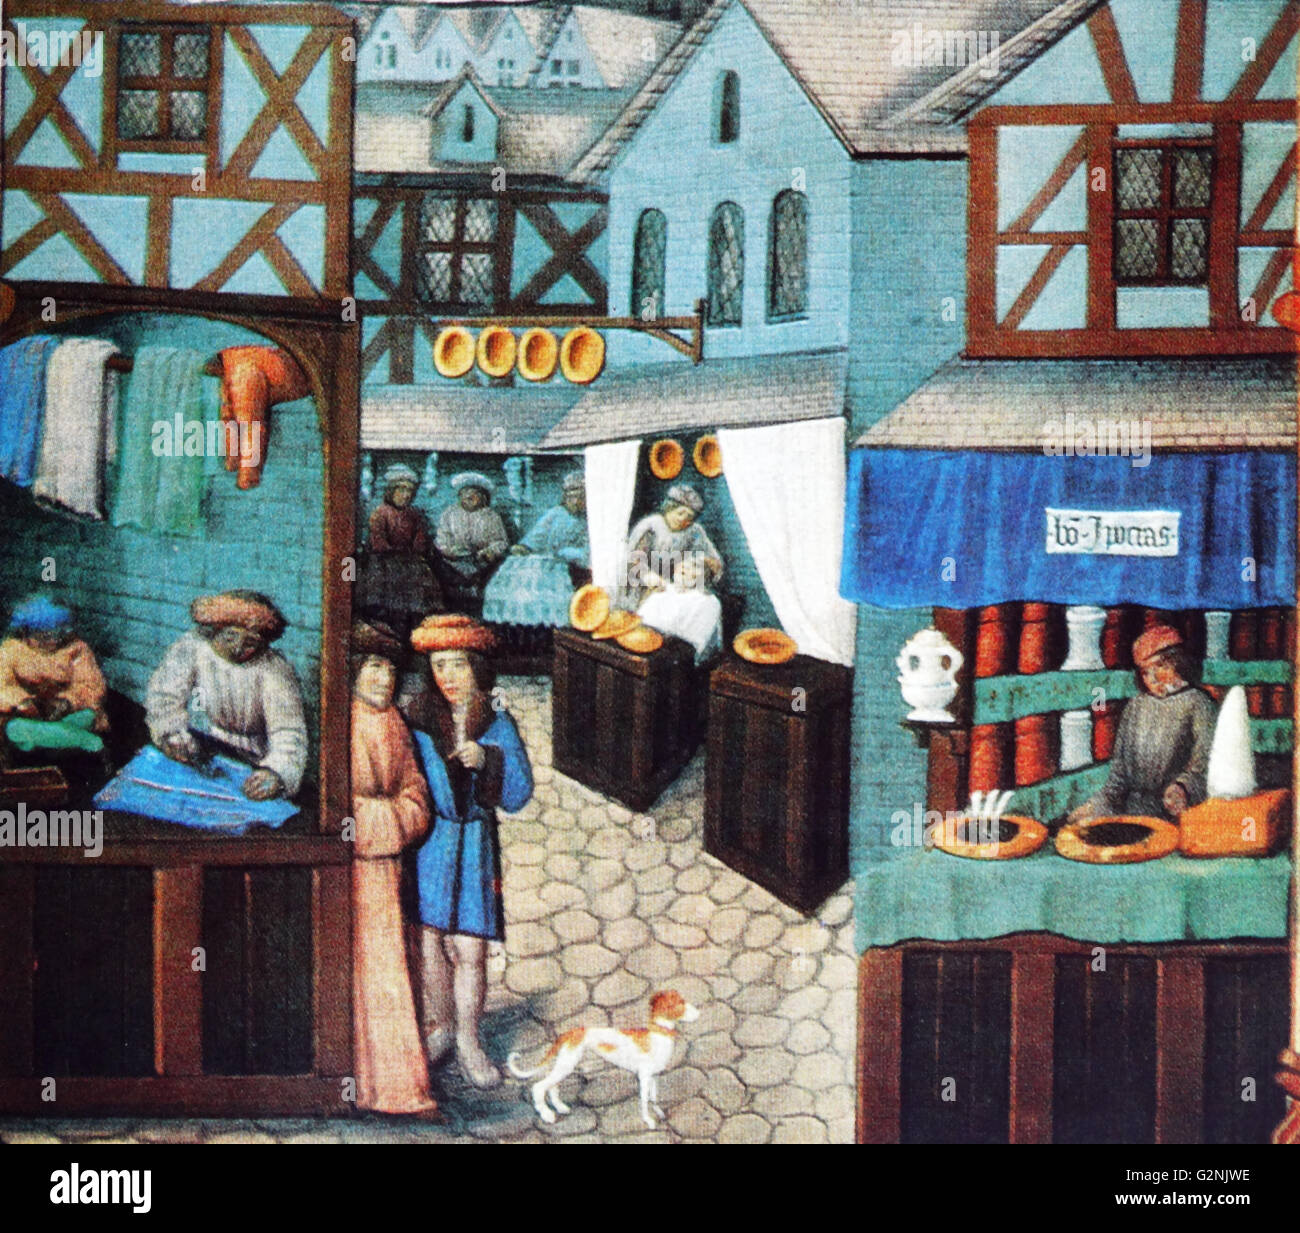 Miniature depicting urban Mediaeval life. On a paved street there are a variety of shops including a tailor, barber, furrier and druggist. Dated 14th Century Stock Photo